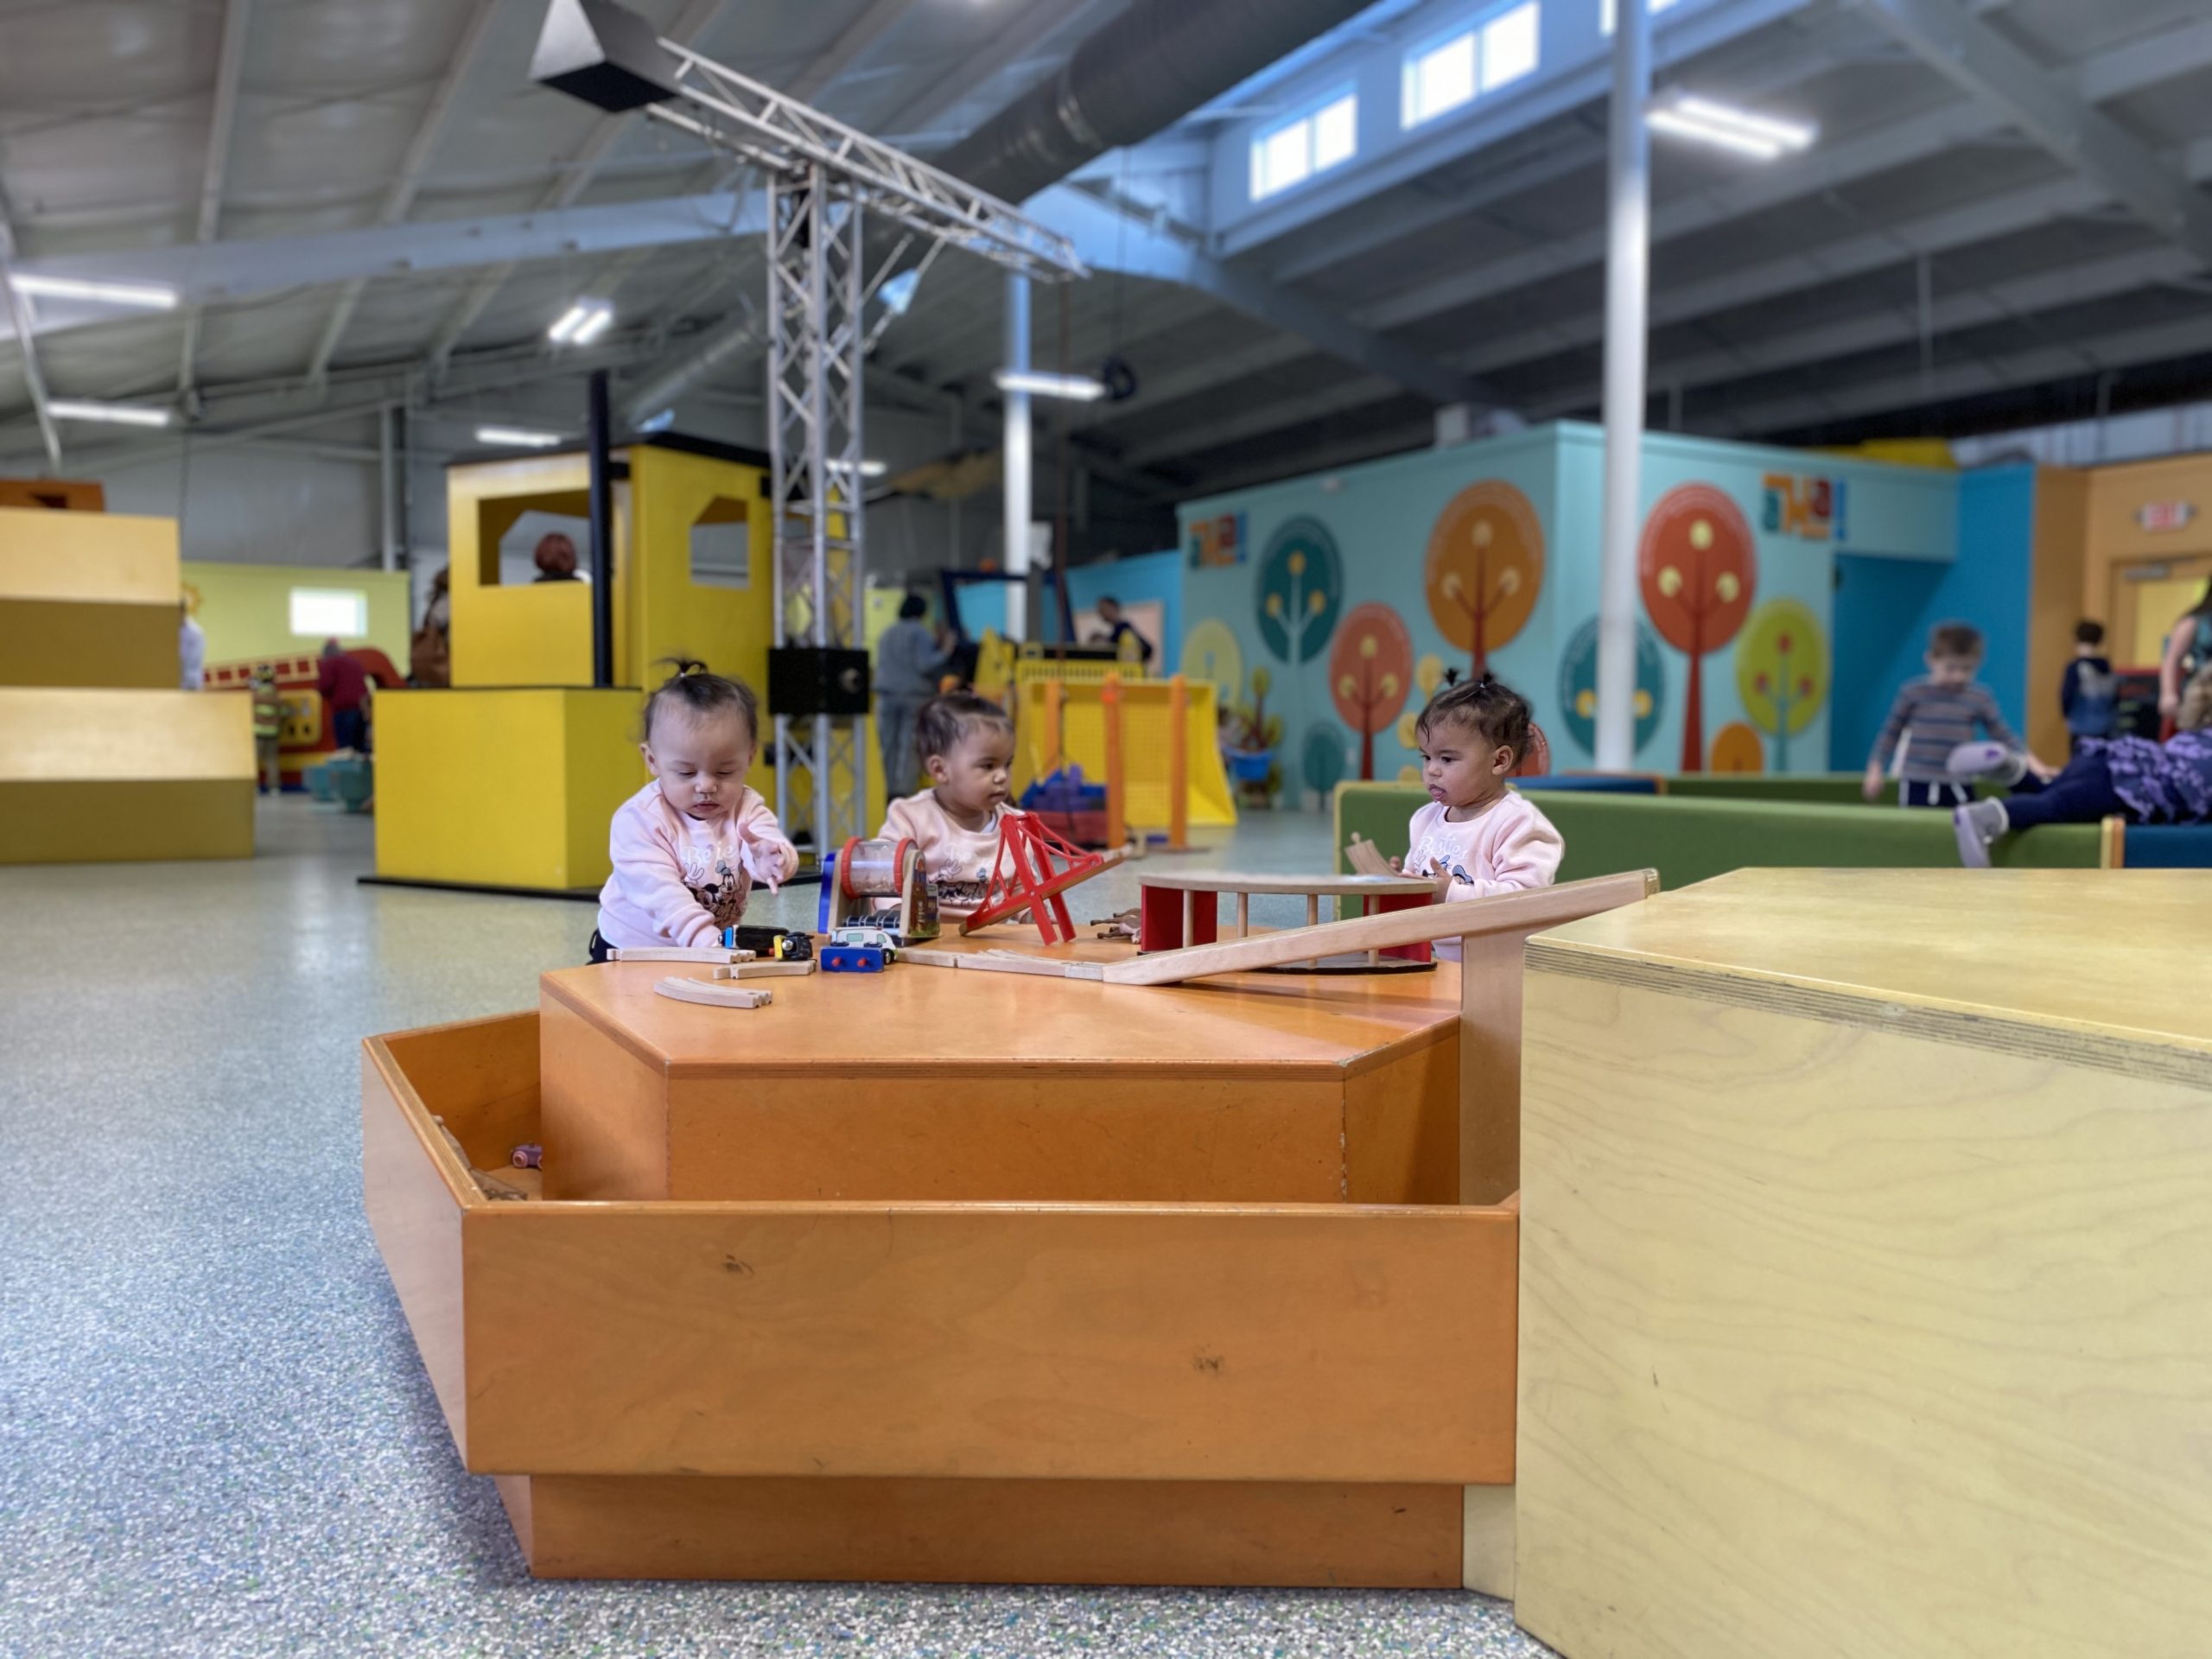 AHA! Children’s Museum: Where Hands-On Learning Meets Imagination